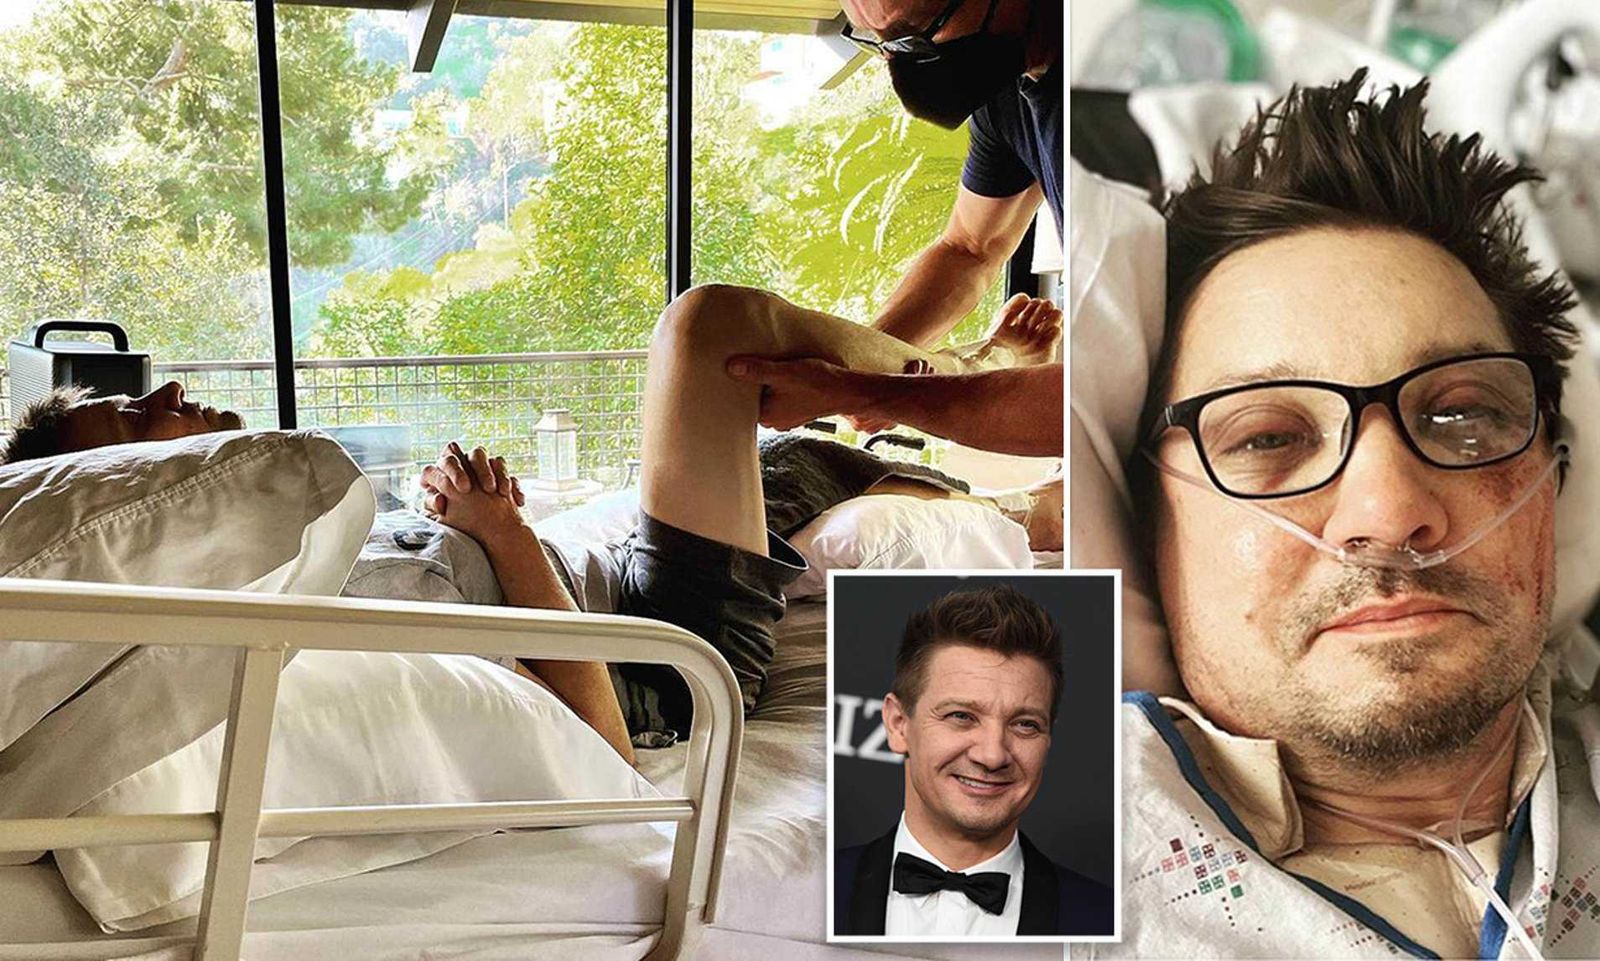 Jeremy Renner's snowplough mishap stirs up 'Wild' reactions in Avengers cast group chat!